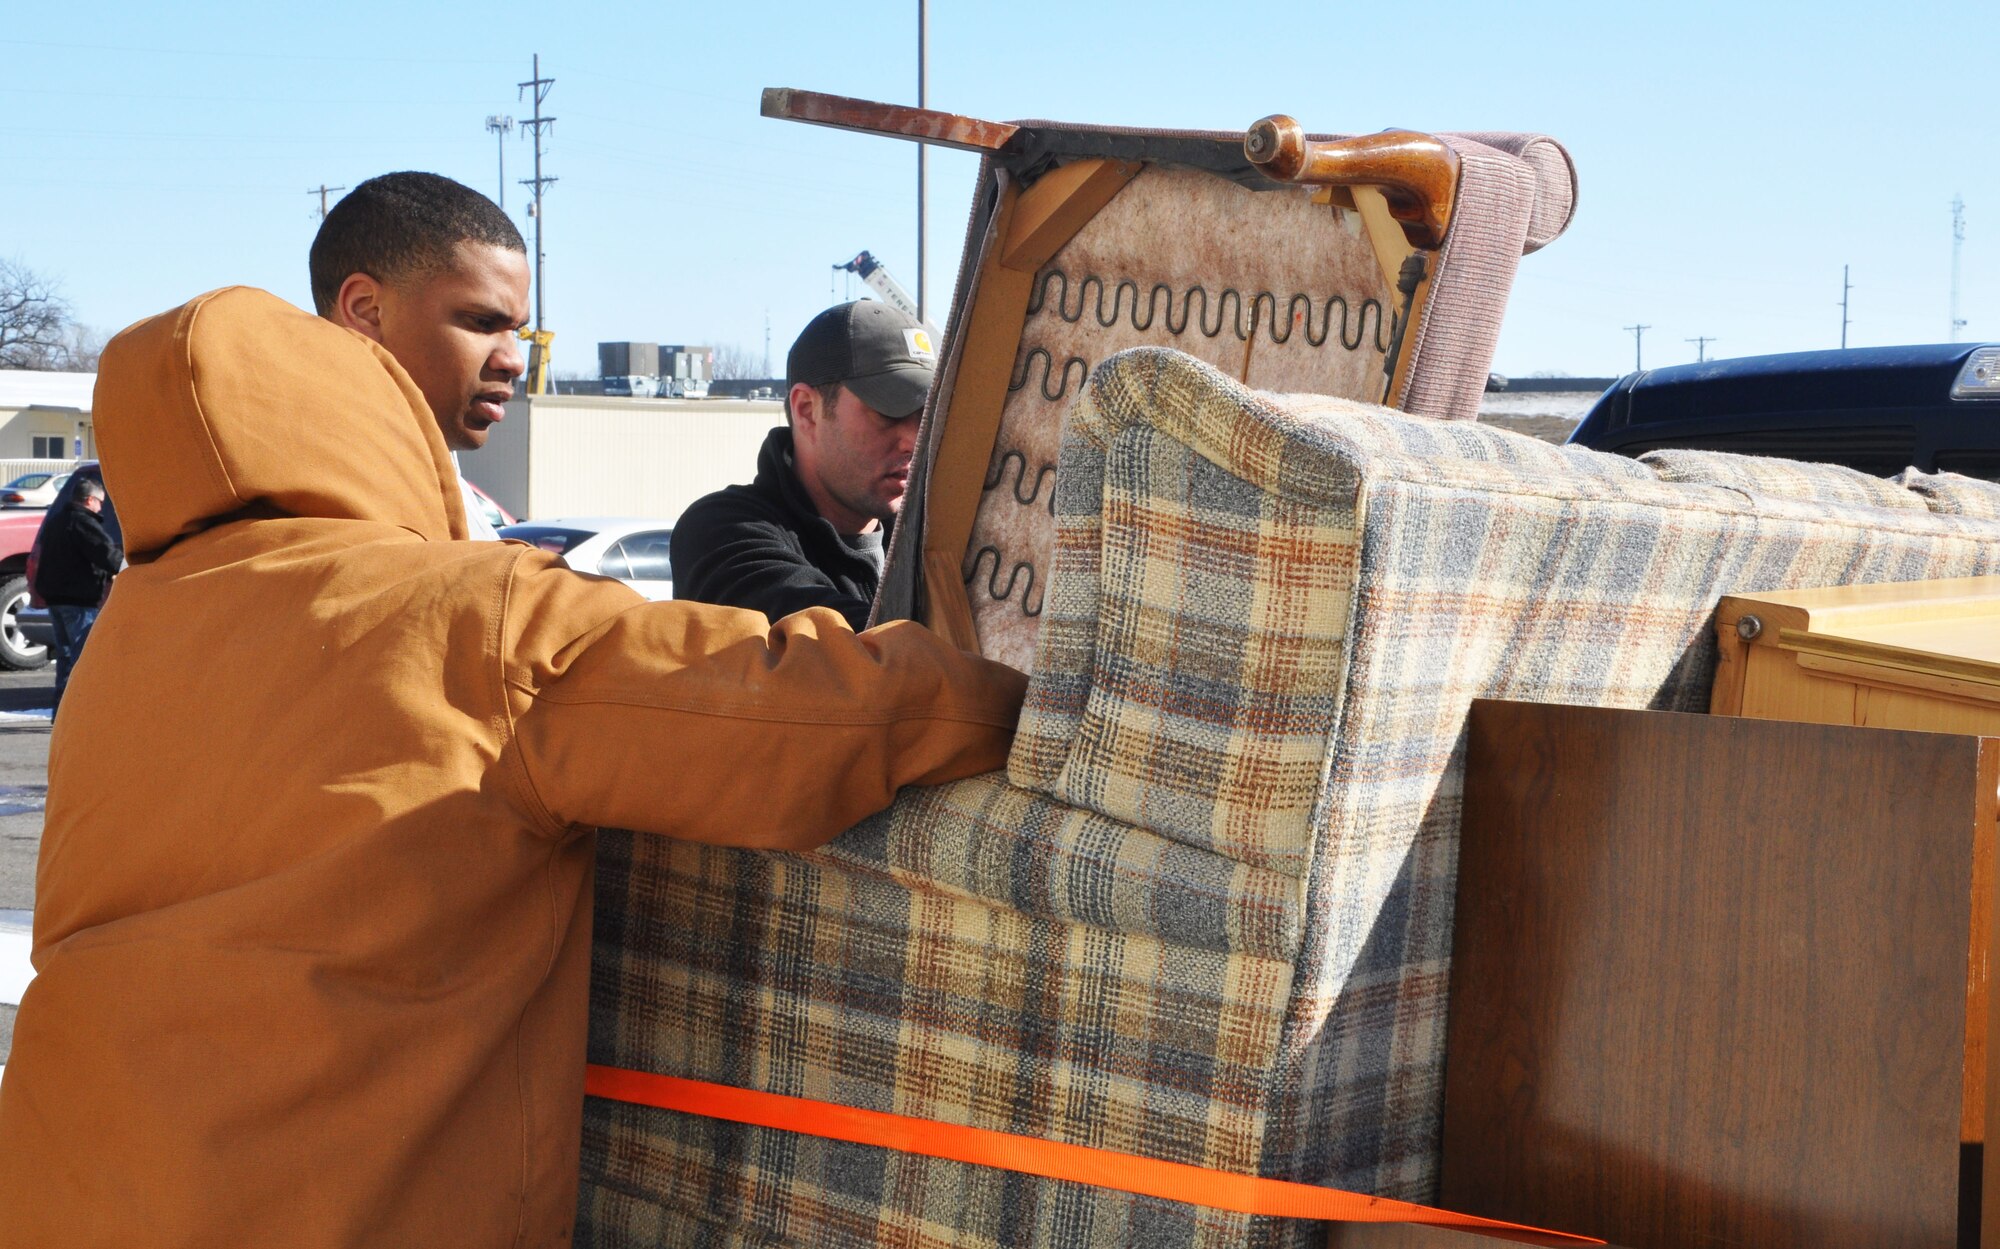 Volunteers from McConnell arrange furniture into the back of a truck outside of a warehouse at His Helping Hands, a local non-profit that distributes household items to families in need in Wichita, Kan., March 5. The VA in Wichita works with His Helping Hands to provide household goods for homeless veterans as part of their initiative to end homelessness. (U.S. Air Force photo by Tech. Sgt. Abigail Klein) 
